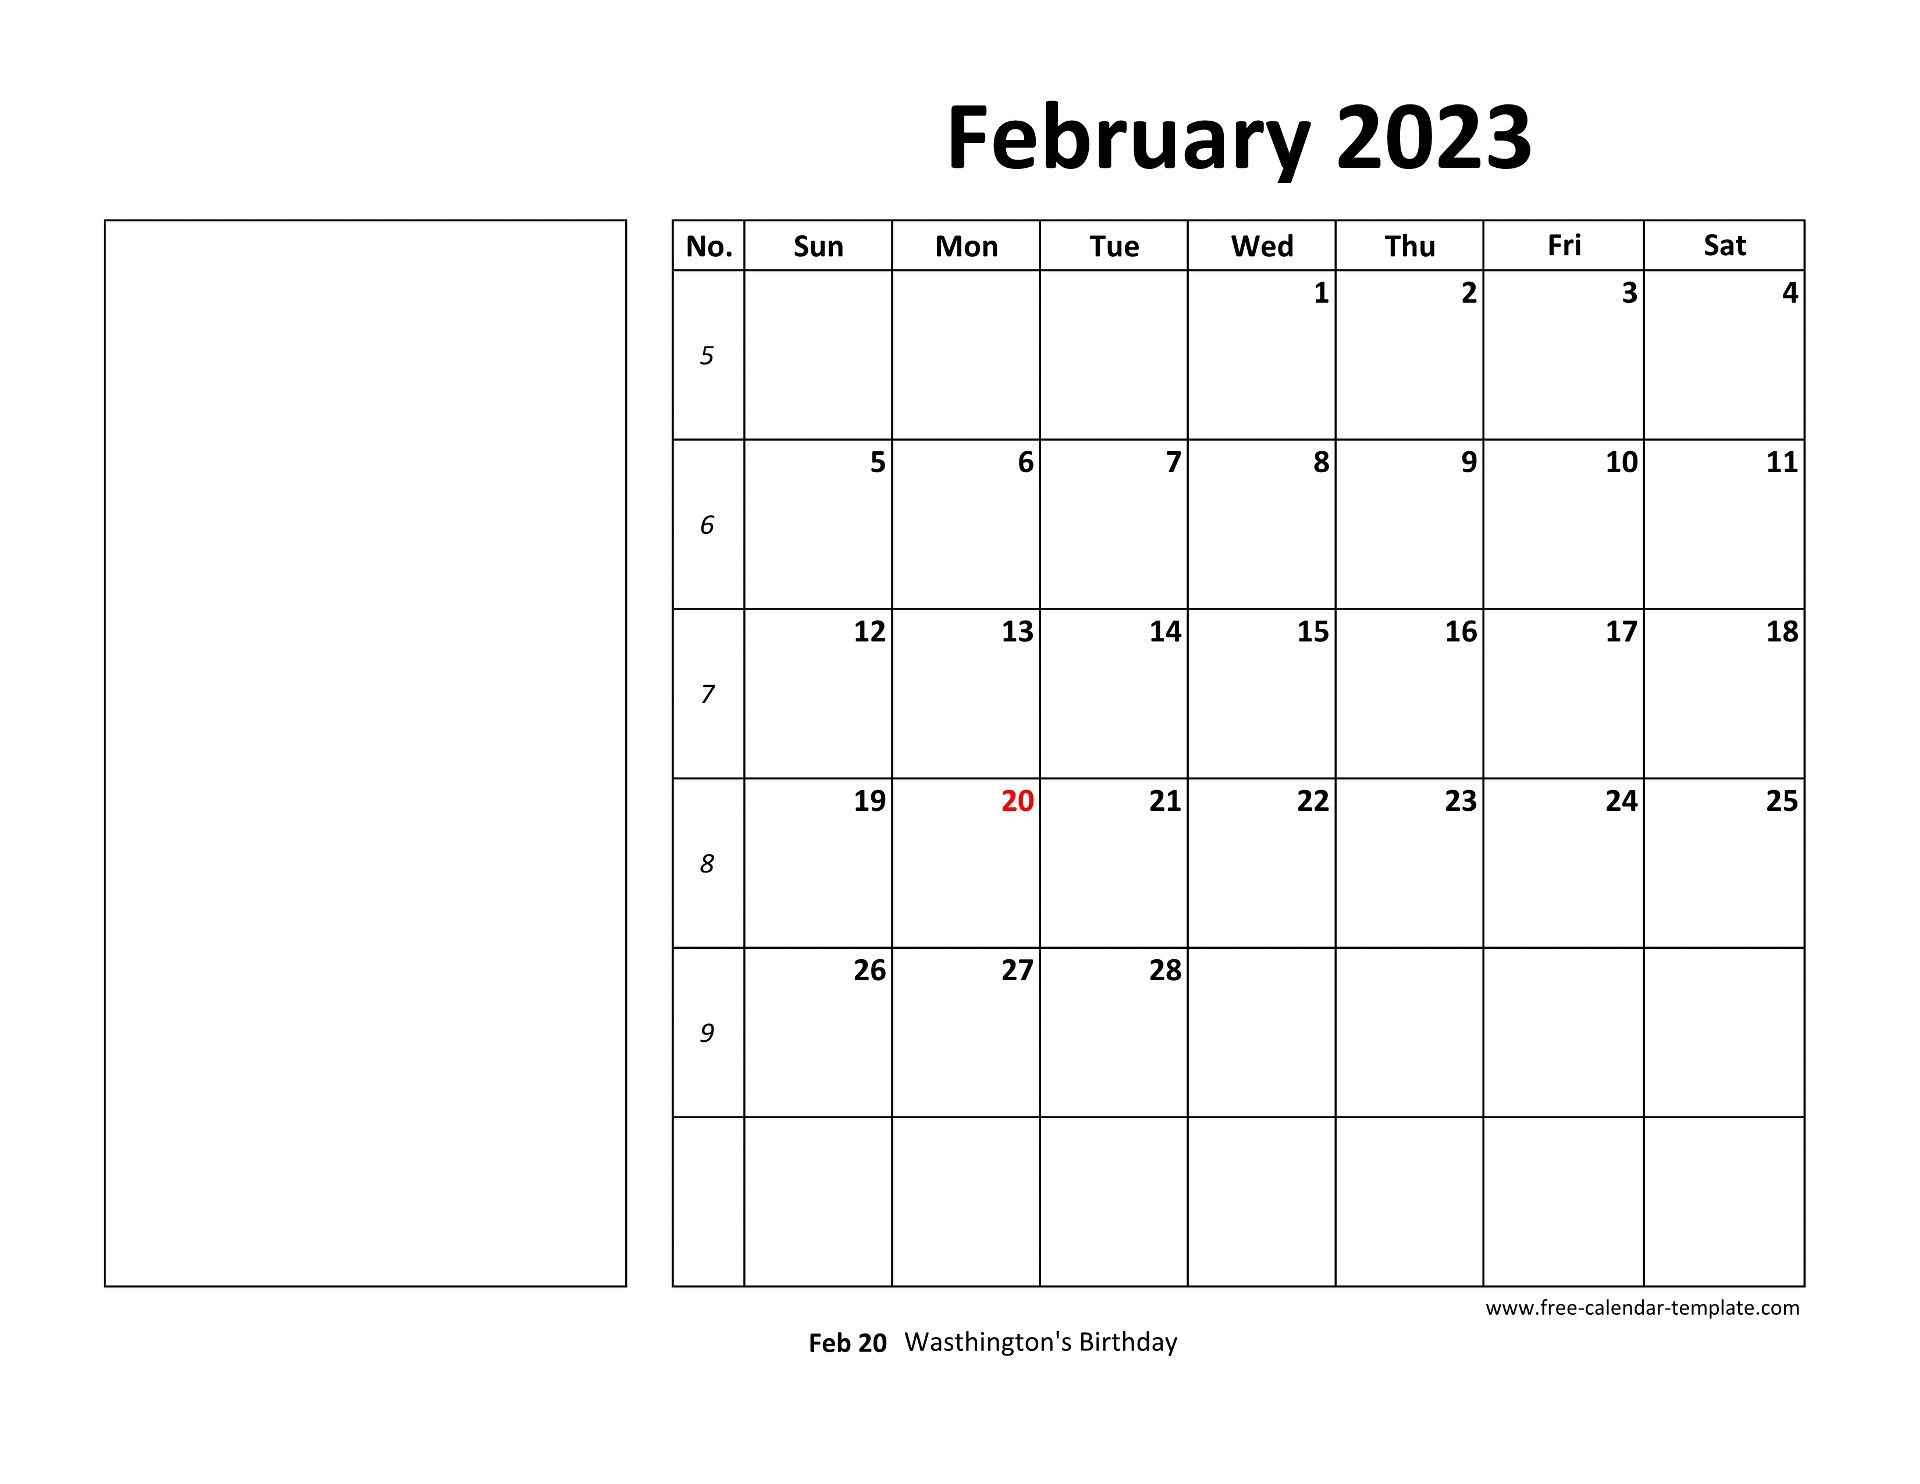 February 2023 Calendar With Lines Get Calender 2023 Update